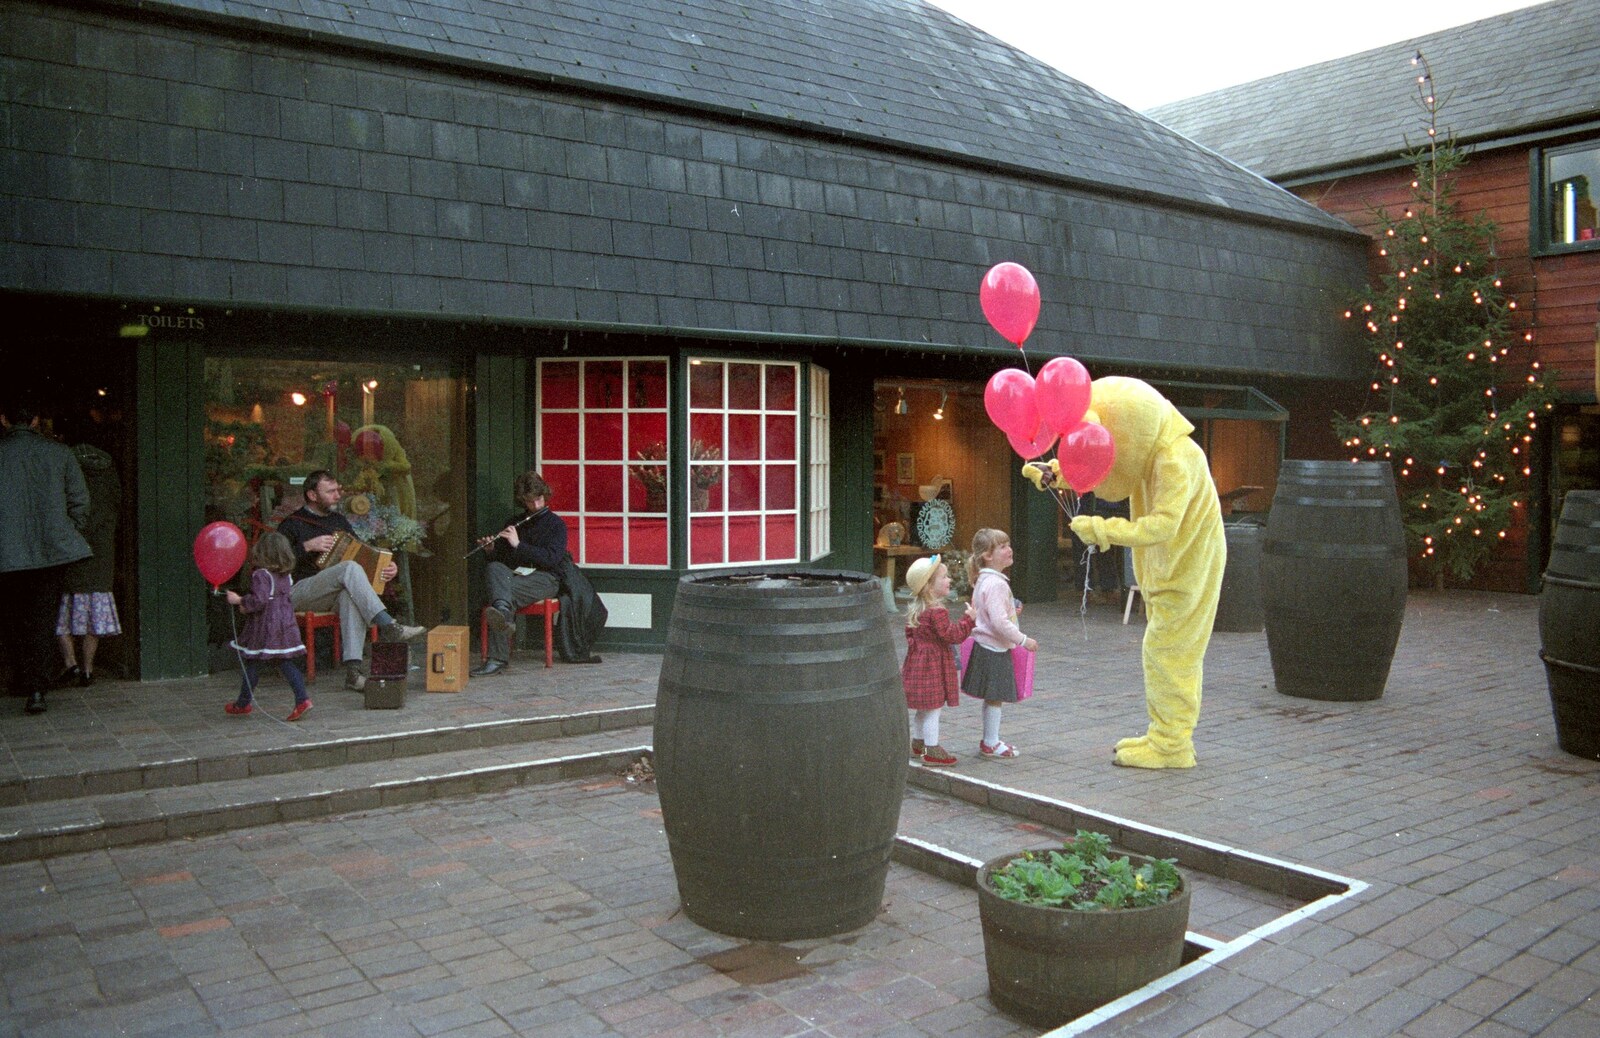 Balloons are handed out from Uni: A Dinner Party, Harbertonford and Buckfastleigh, Devon - 24th December 1988